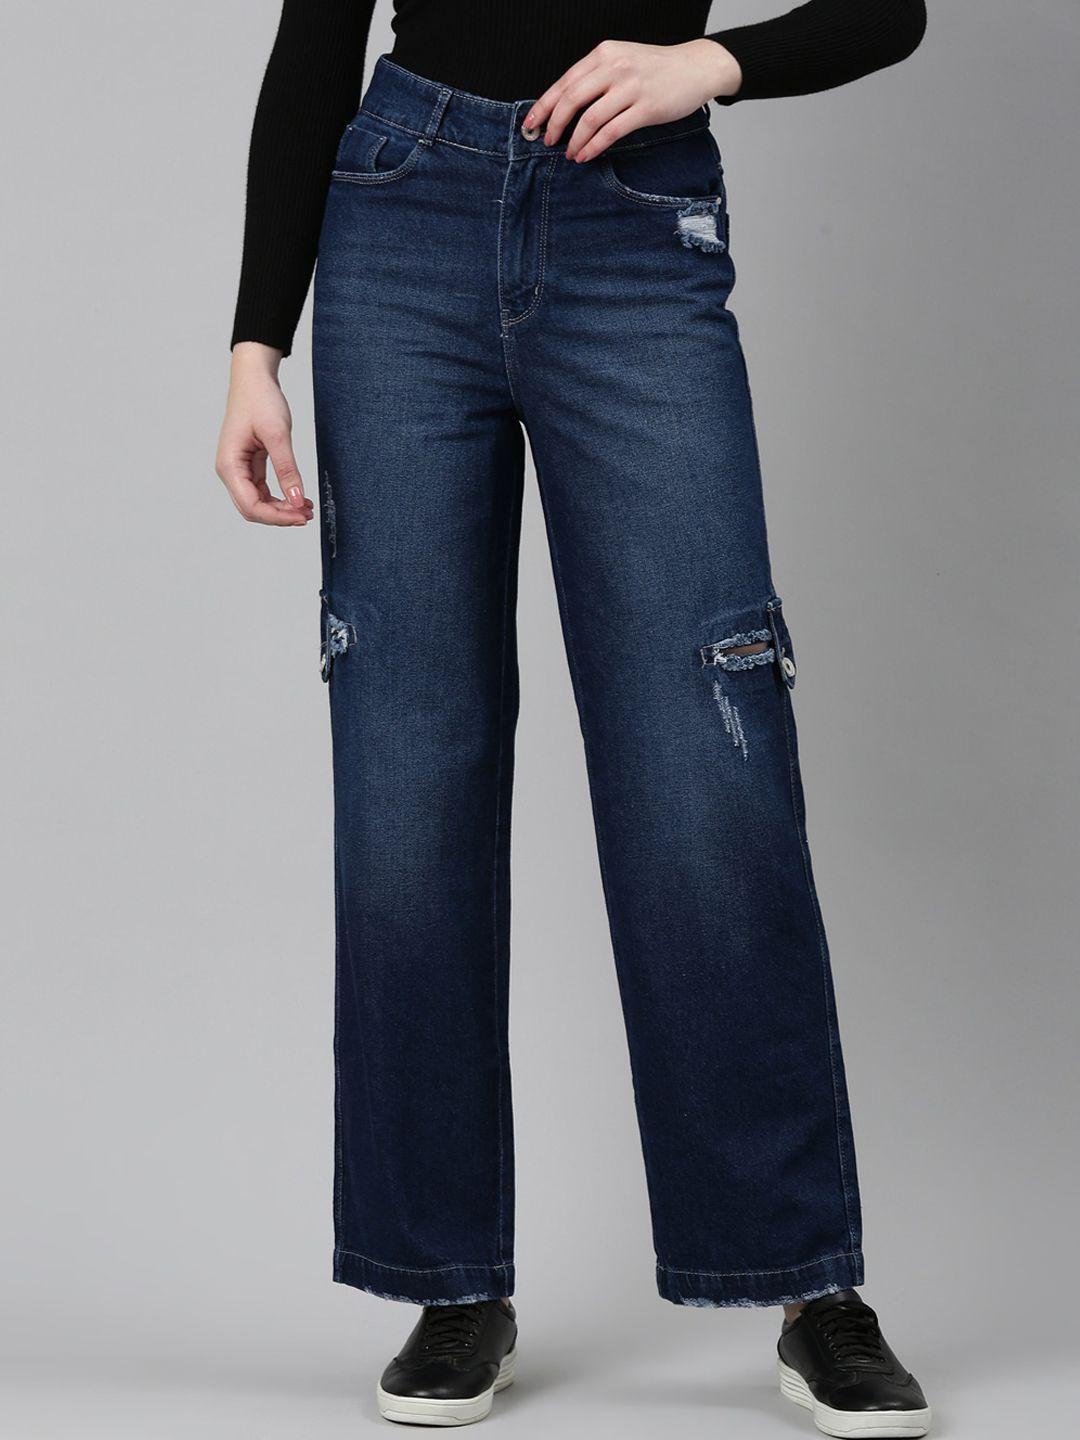 showoff women jean straight fit mid rise low distress cotton jeans